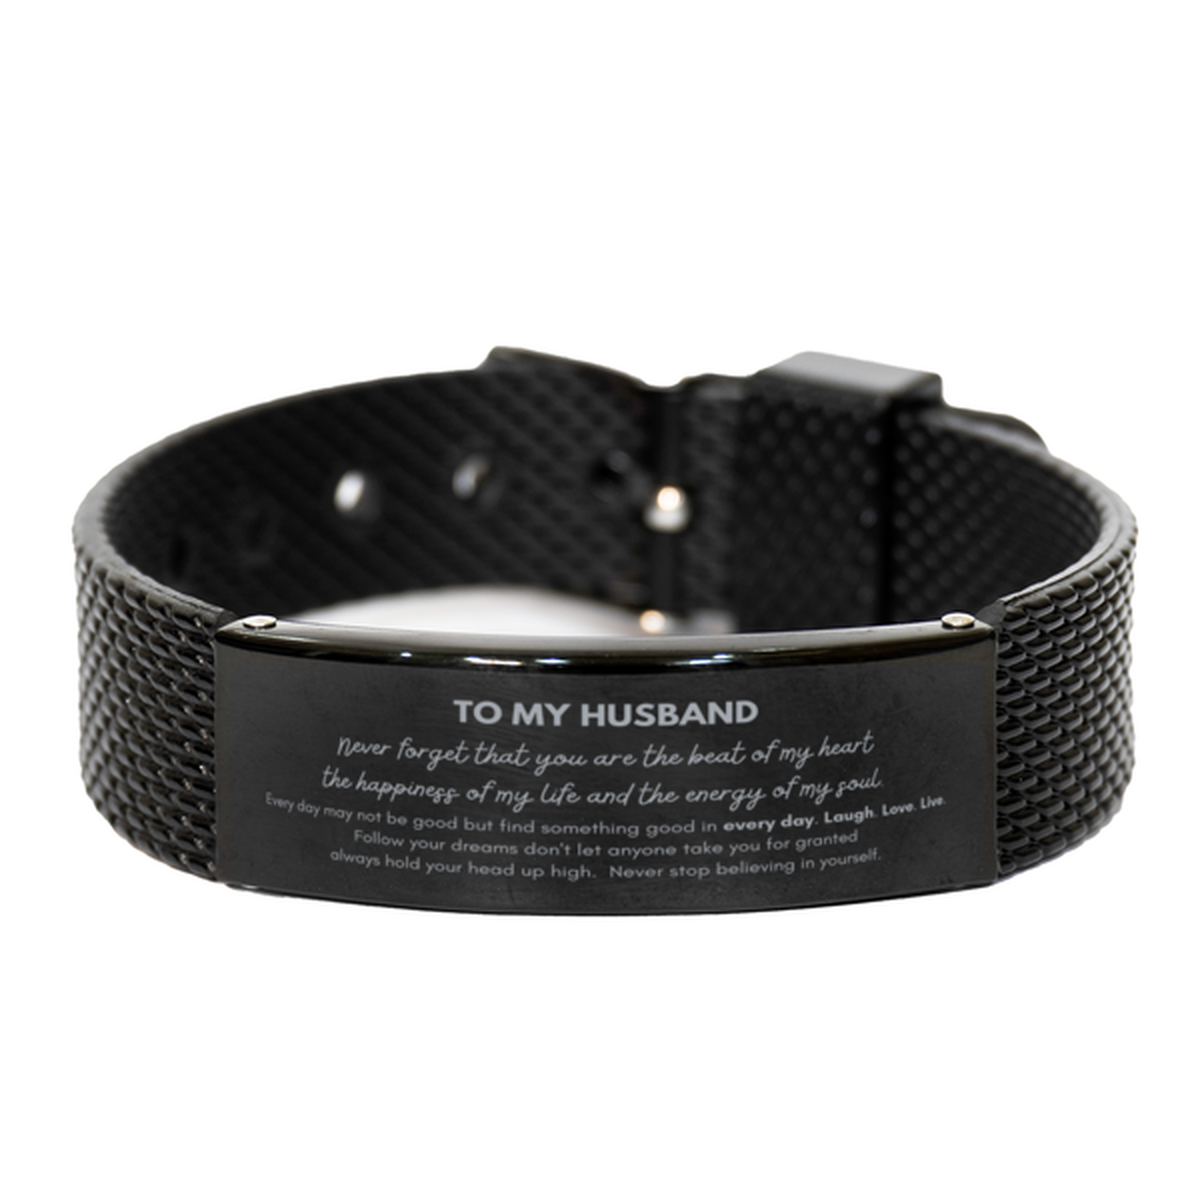 To My Husband Bracelet Gifts, Christmas Husband Black Shark Mesh Bracelet Present, Birthday Unique Motivational For Husband, To My Husband Never forget that you are the beat of my heart the happiness of my life and the energy of my soul